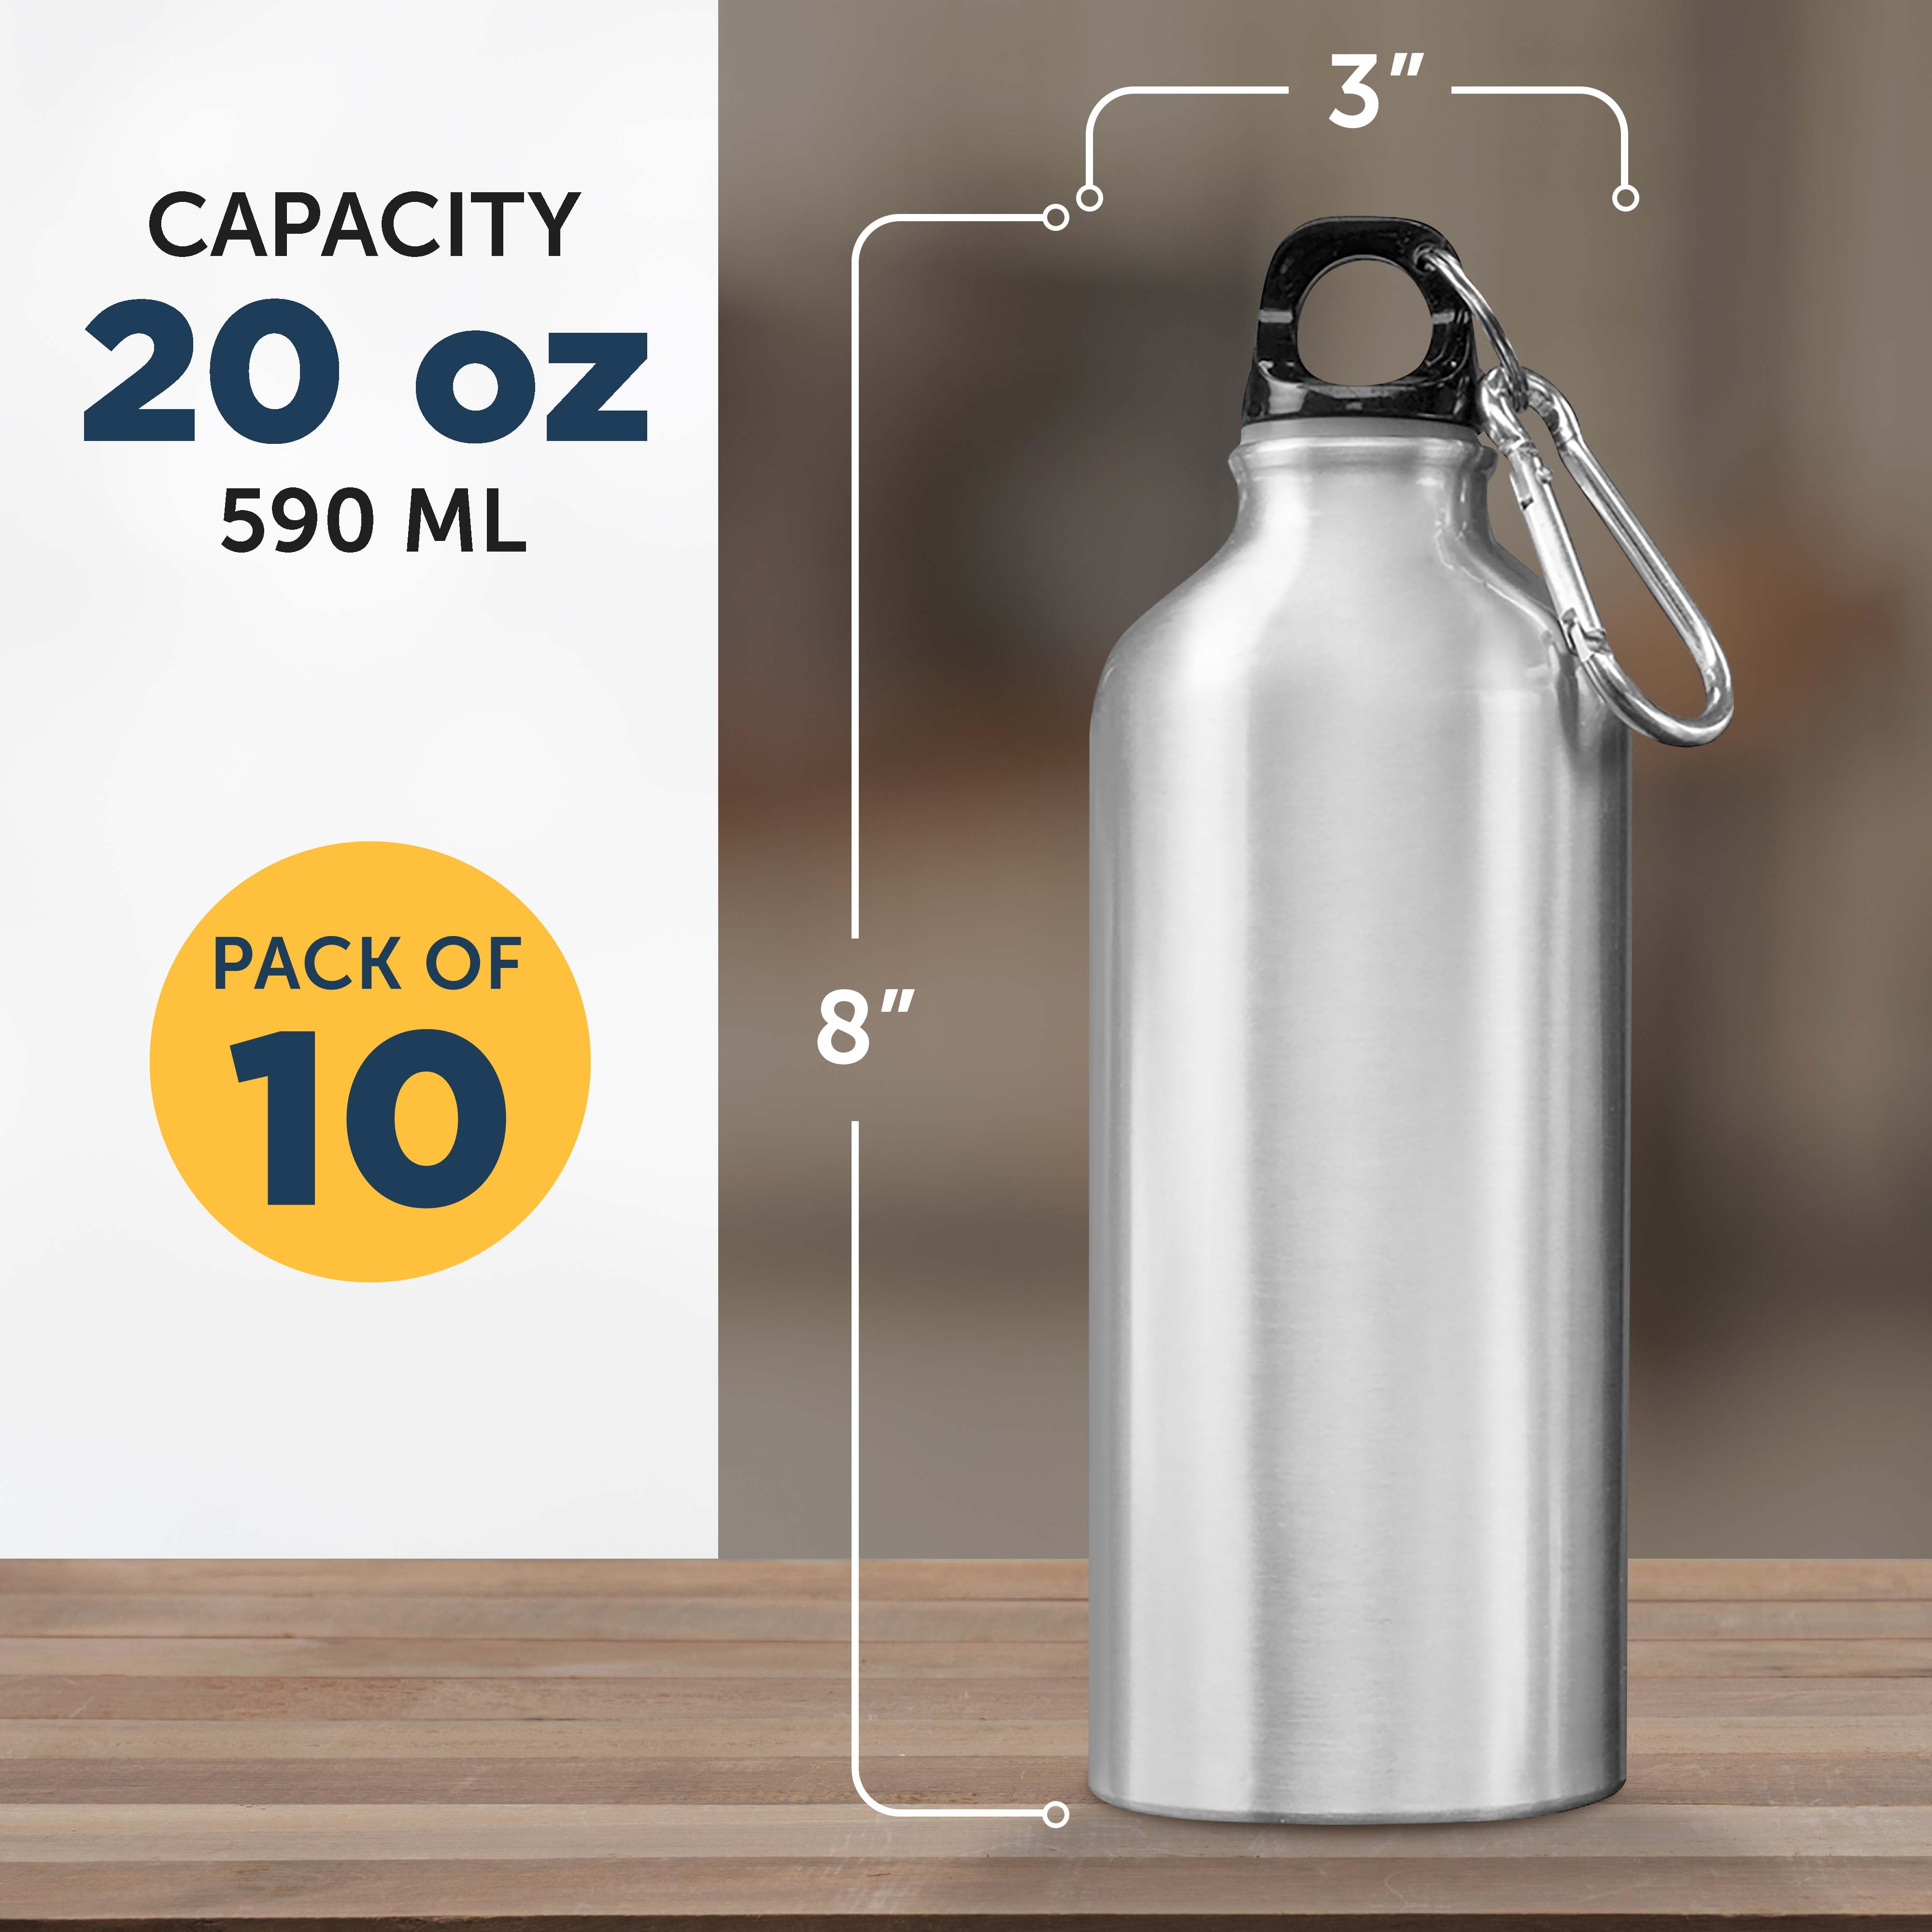  DISCOUNT PROMOS Bullet Shape Stainless Steel Water Bottles 26  oz. Set of 10, Bulk Pack - Leak Proof, With Carabiner, Leak Proof, Perfect  for Gym, Hiking, Camping, Outdoor Sports - Silver 